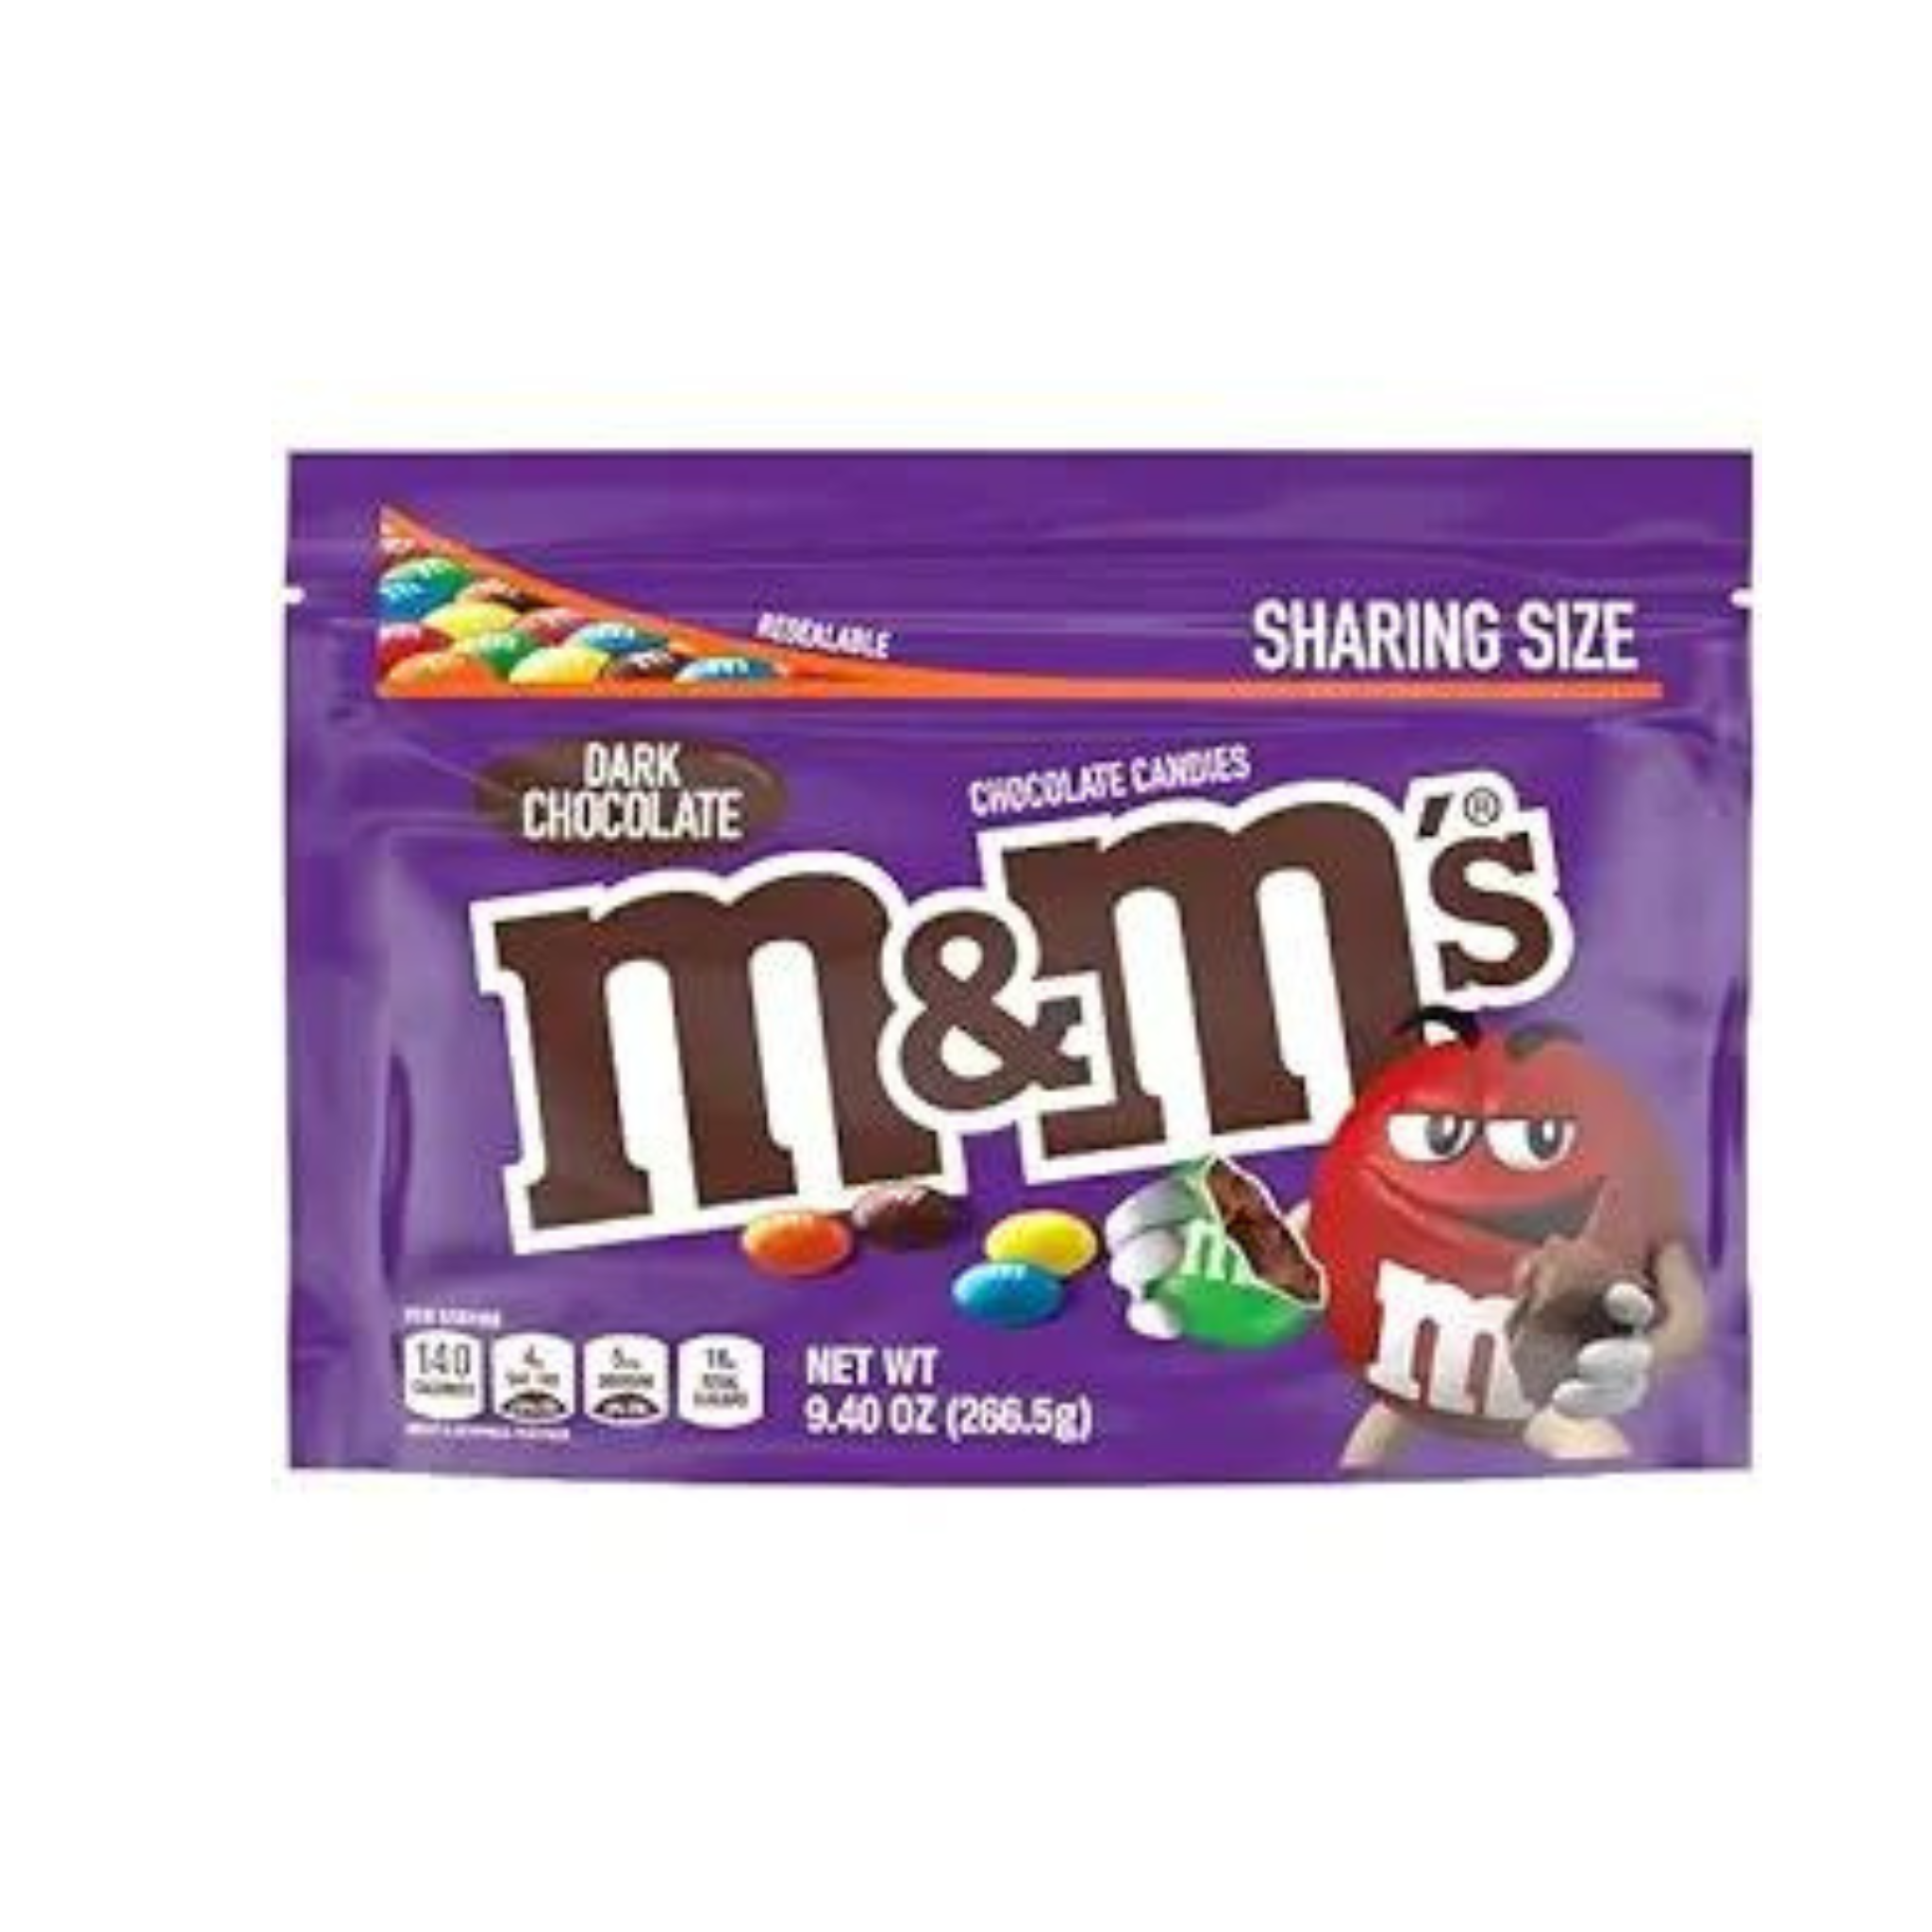 Sharing Size Bag of M&M’S Dark Chocolate Candy (9.4-Oz)